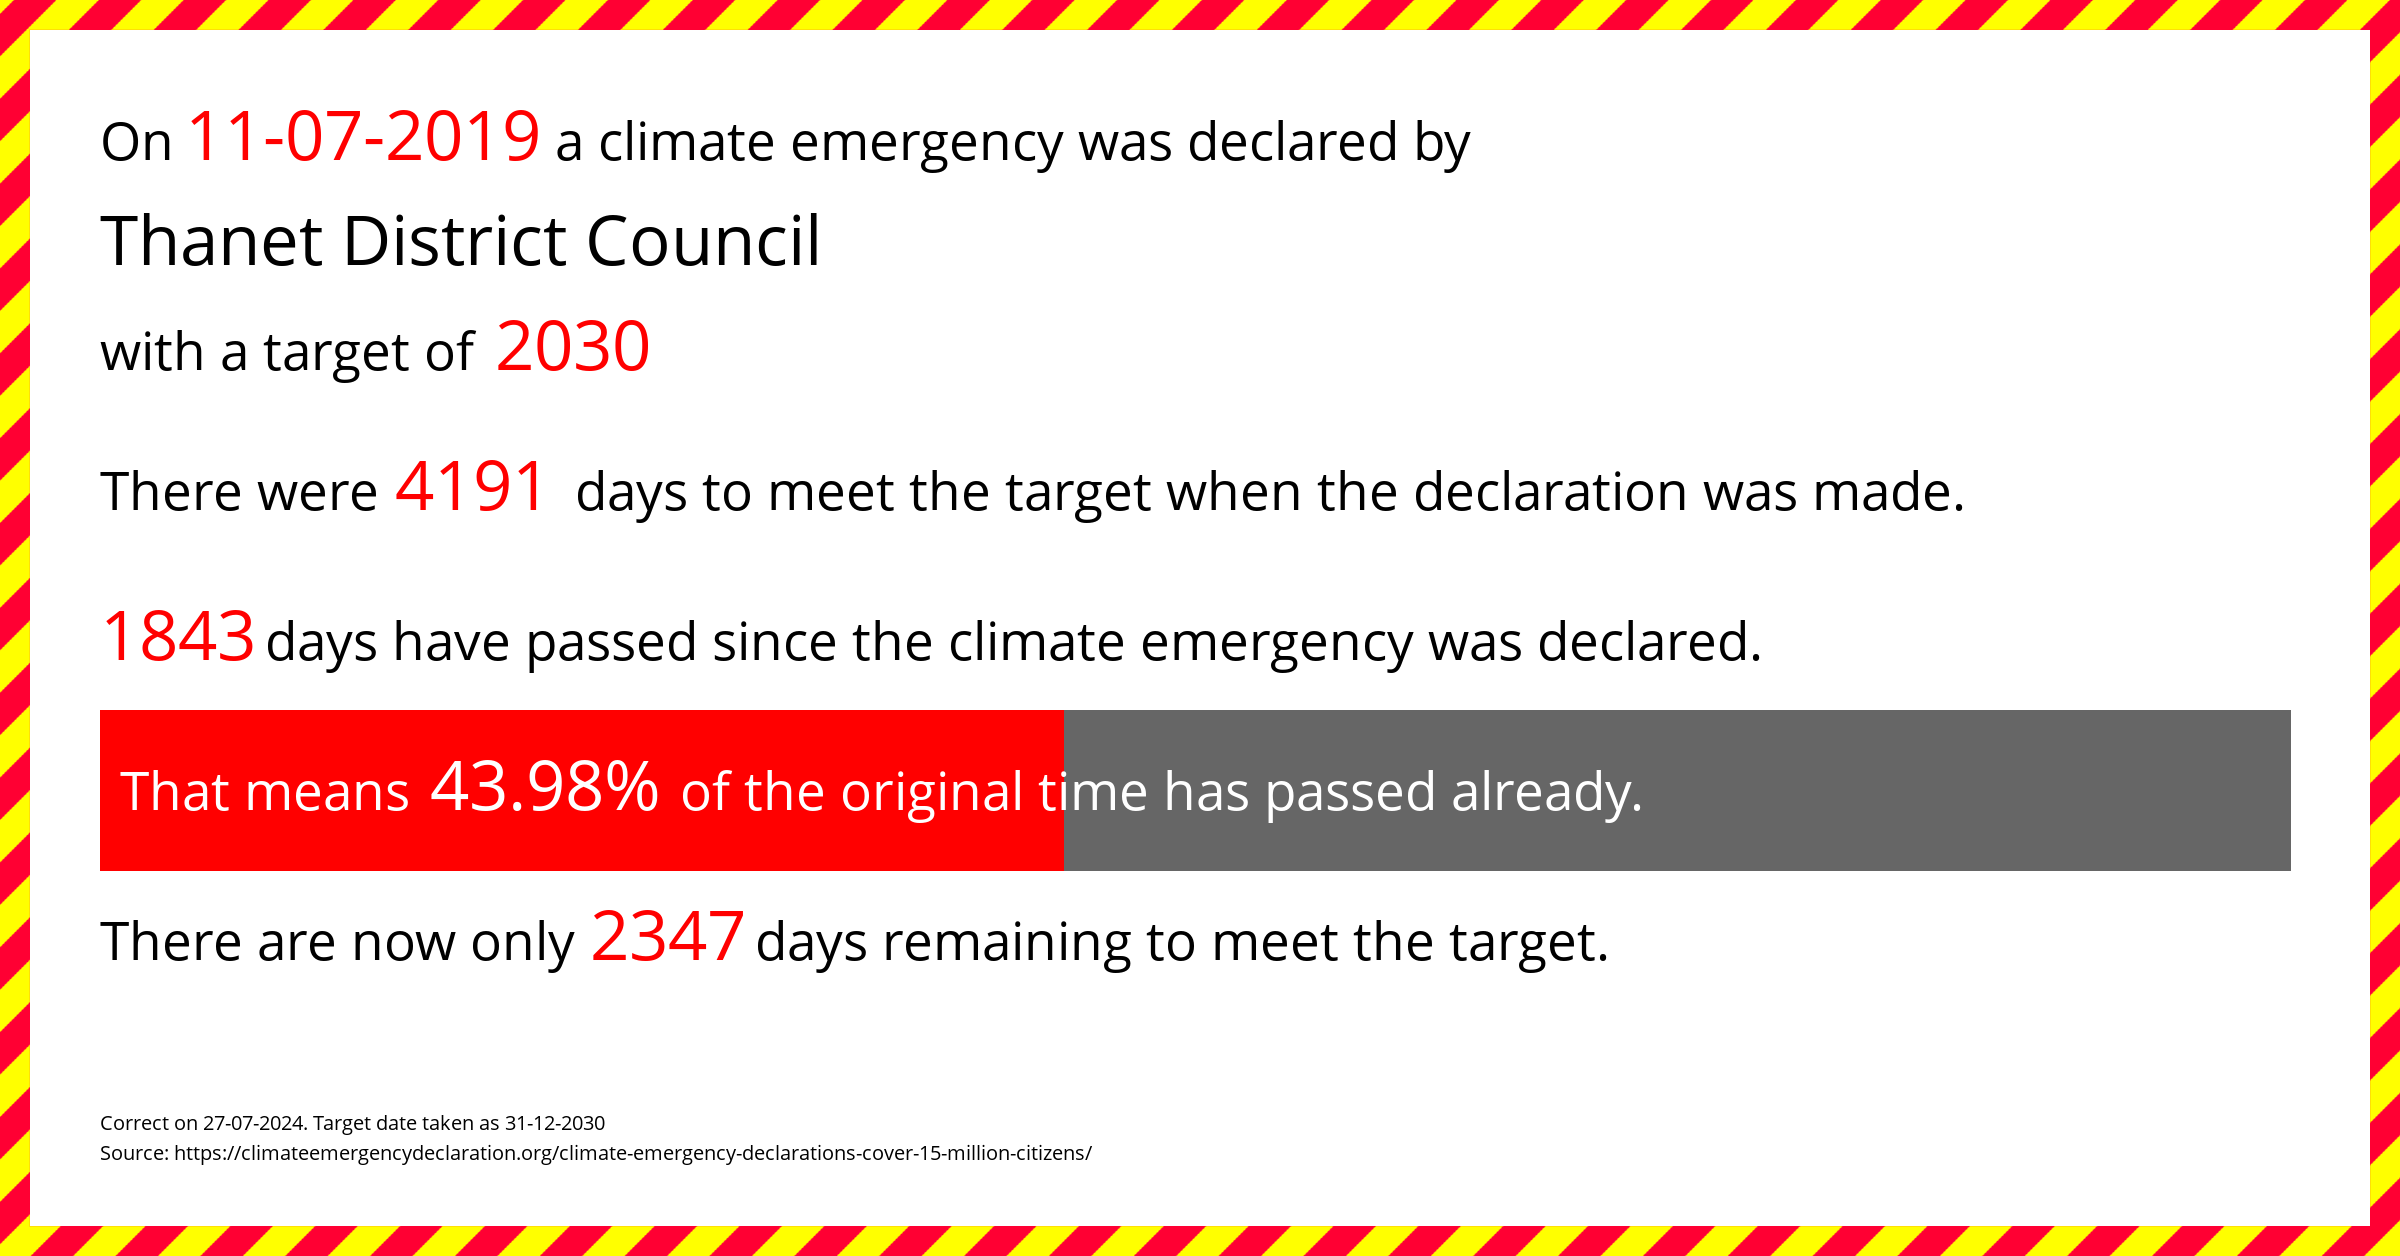 Thanet District Council declared a Climate emergency on Thursday 11th July 2019, with a target of 2030.